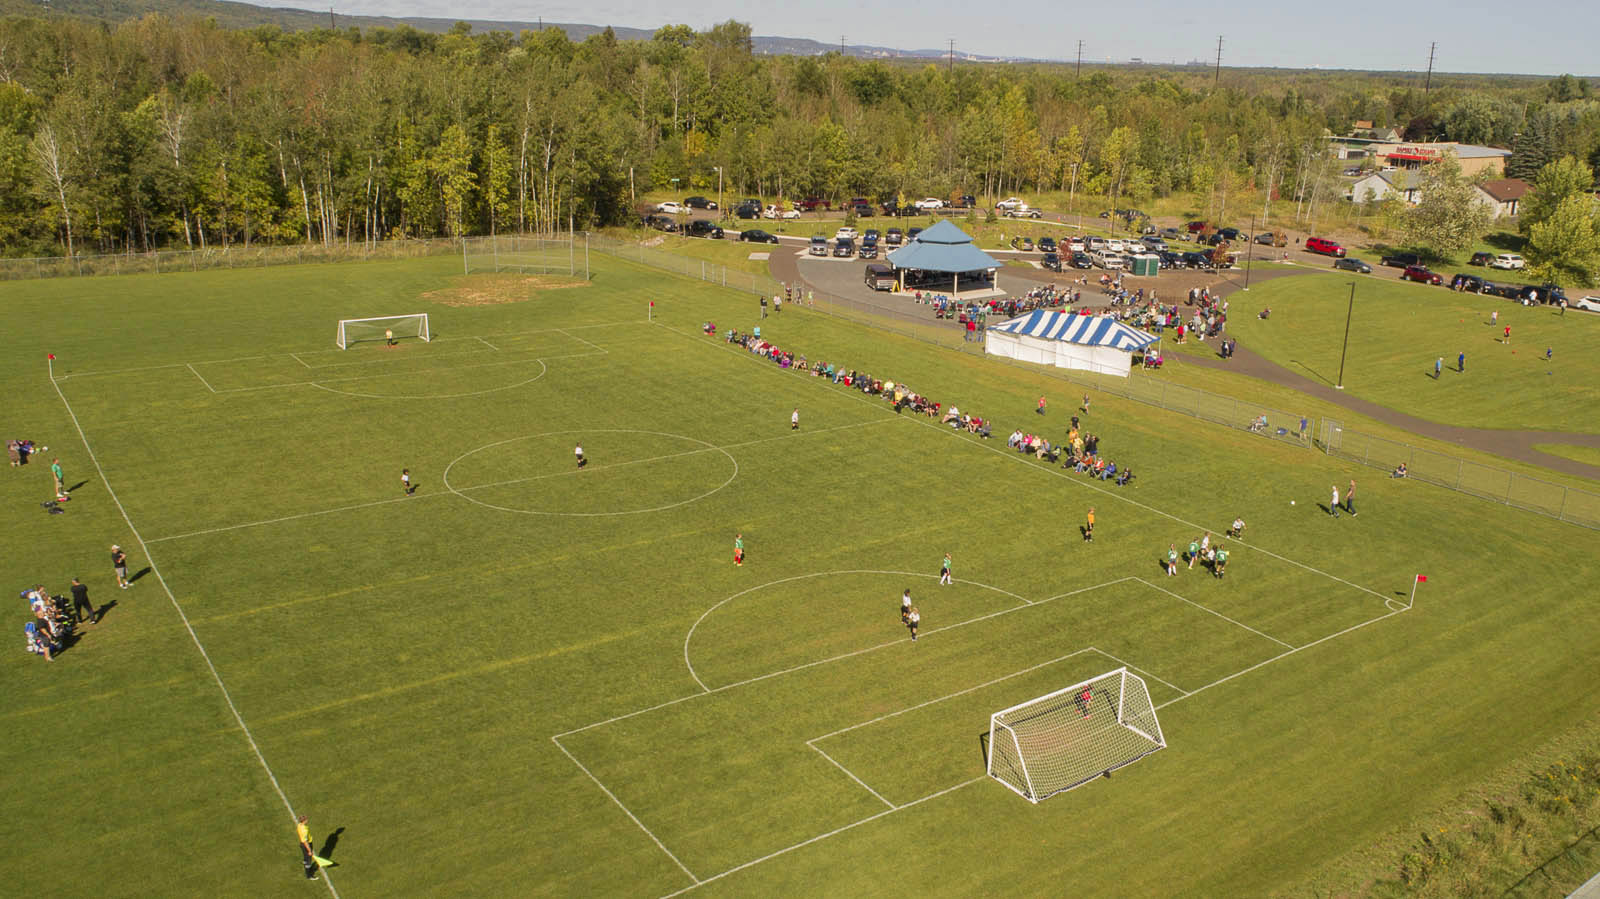 An aerial view of the soccer field at the GND REC, with children playing and people watching